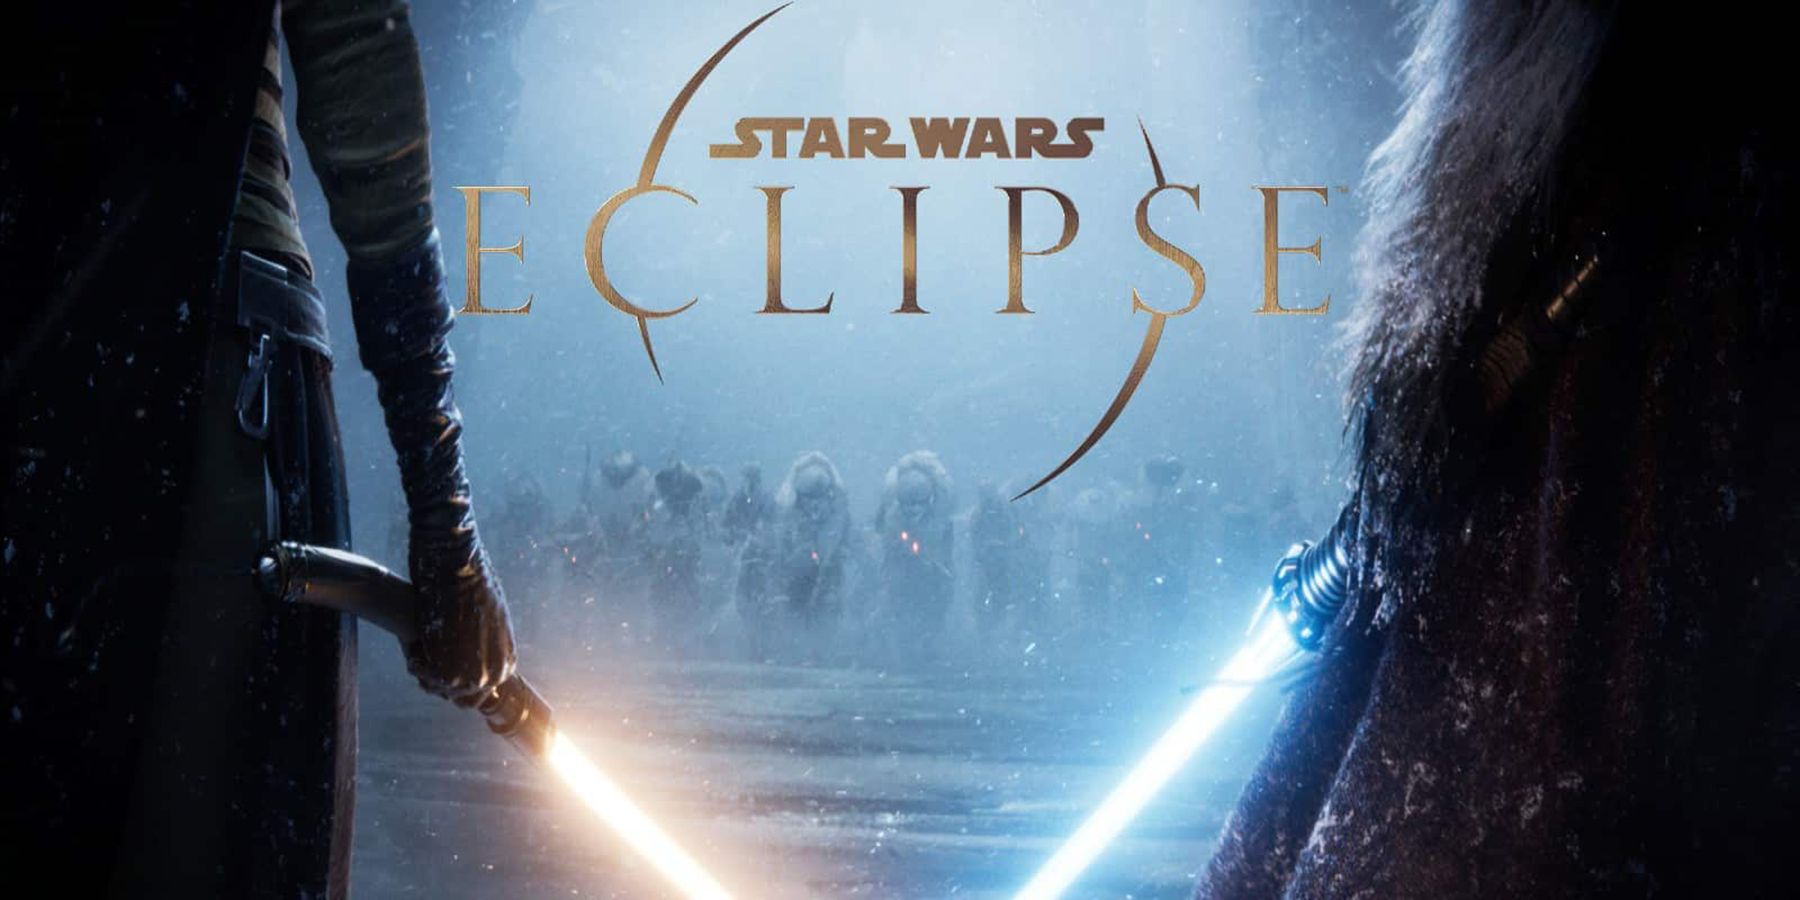 Problems with Star Wars Eclipse have become known. It is unknown at this time what he will do after leaving the post